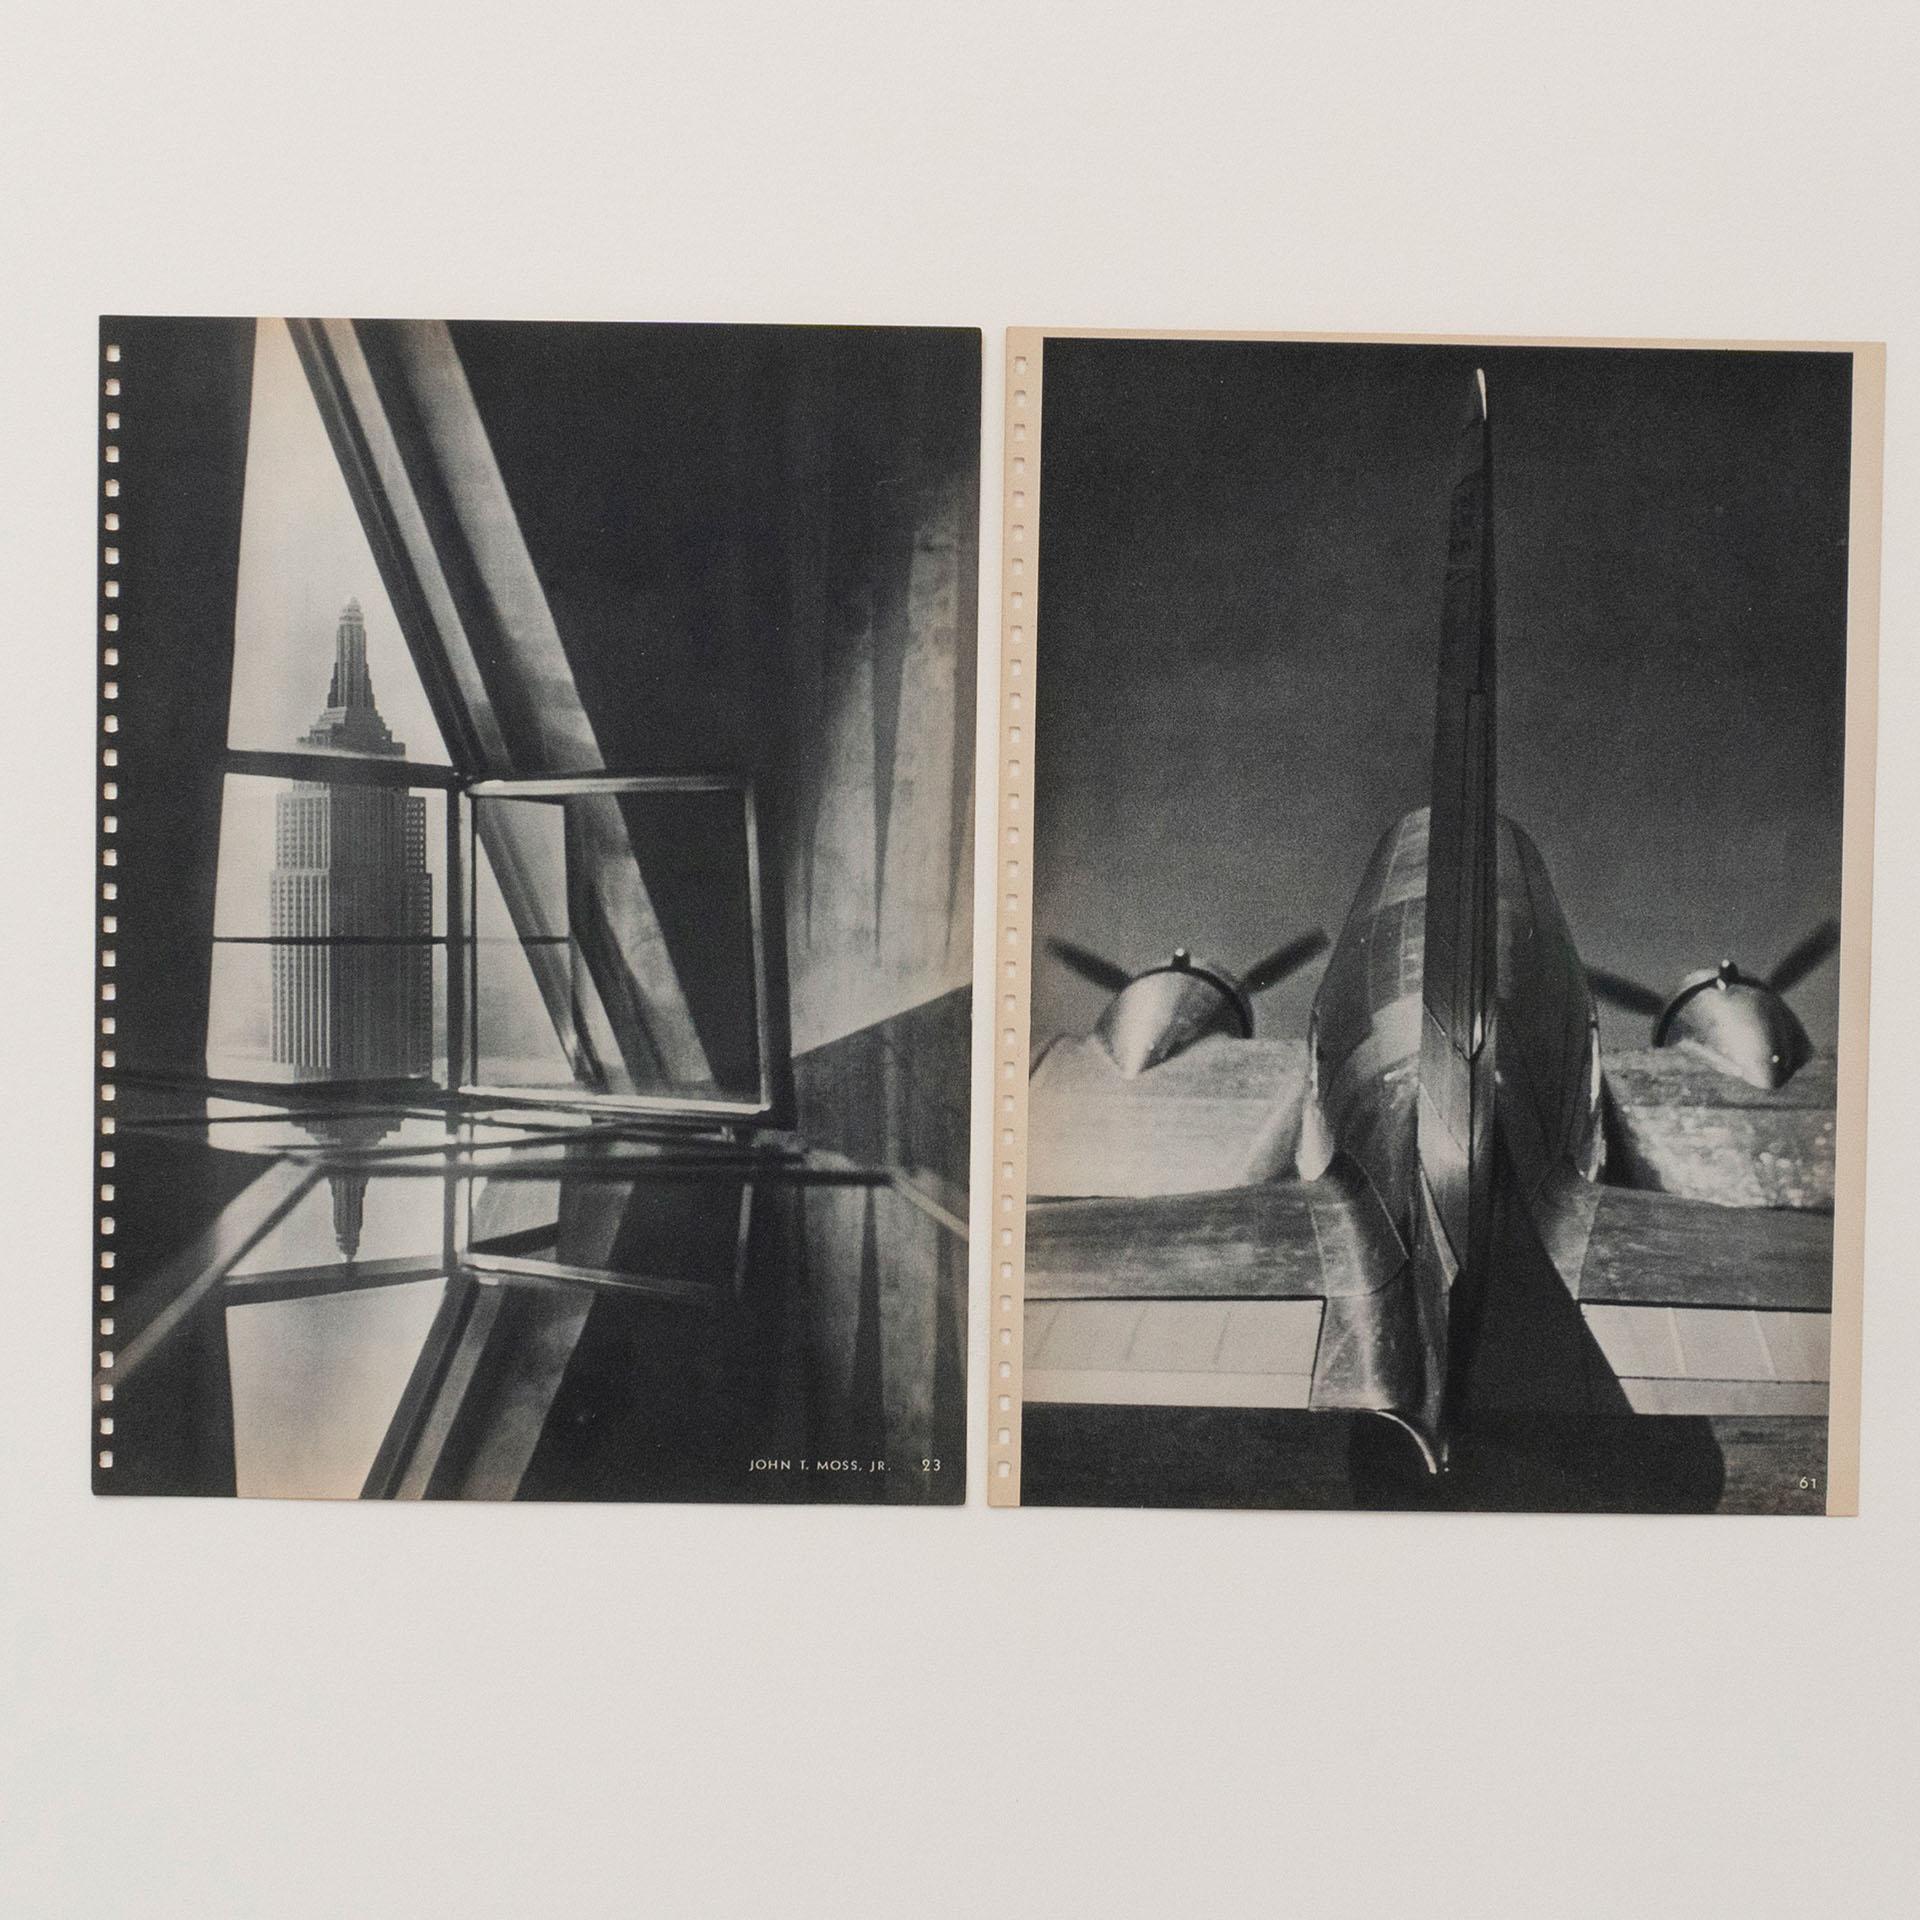 John T.Moss Vintage Photo Gravure, circa 1940 In Good Condition For Sale In Barcelona, Barcelona